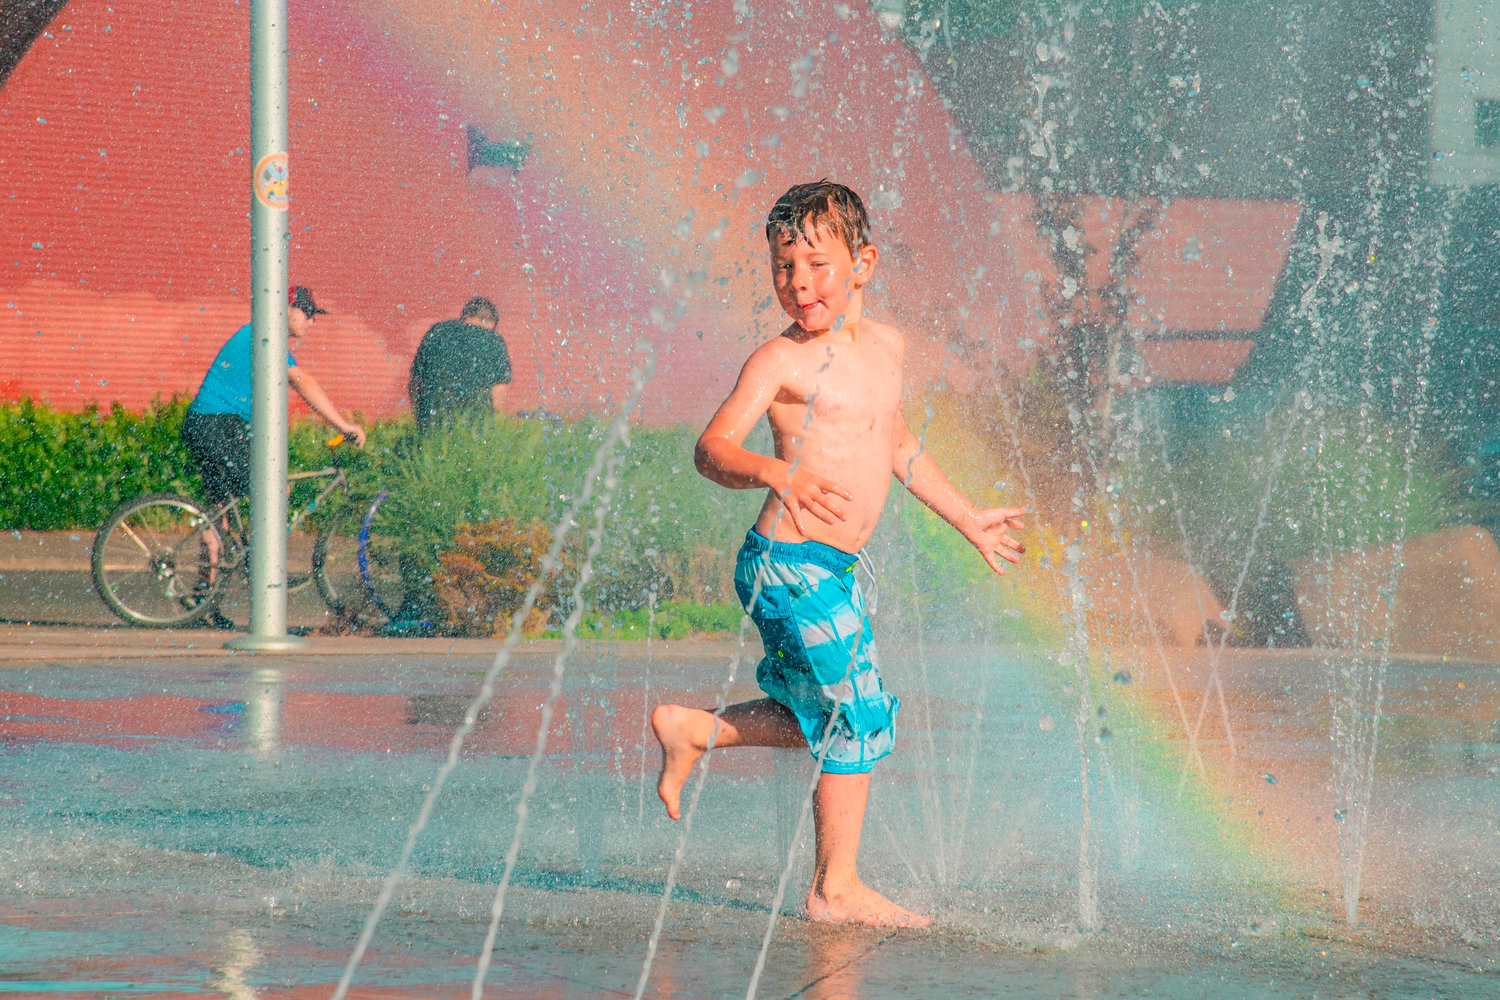 Tyrel Newkirk, 5, runs through streams of water to cool off at the Centralia splash park last May.